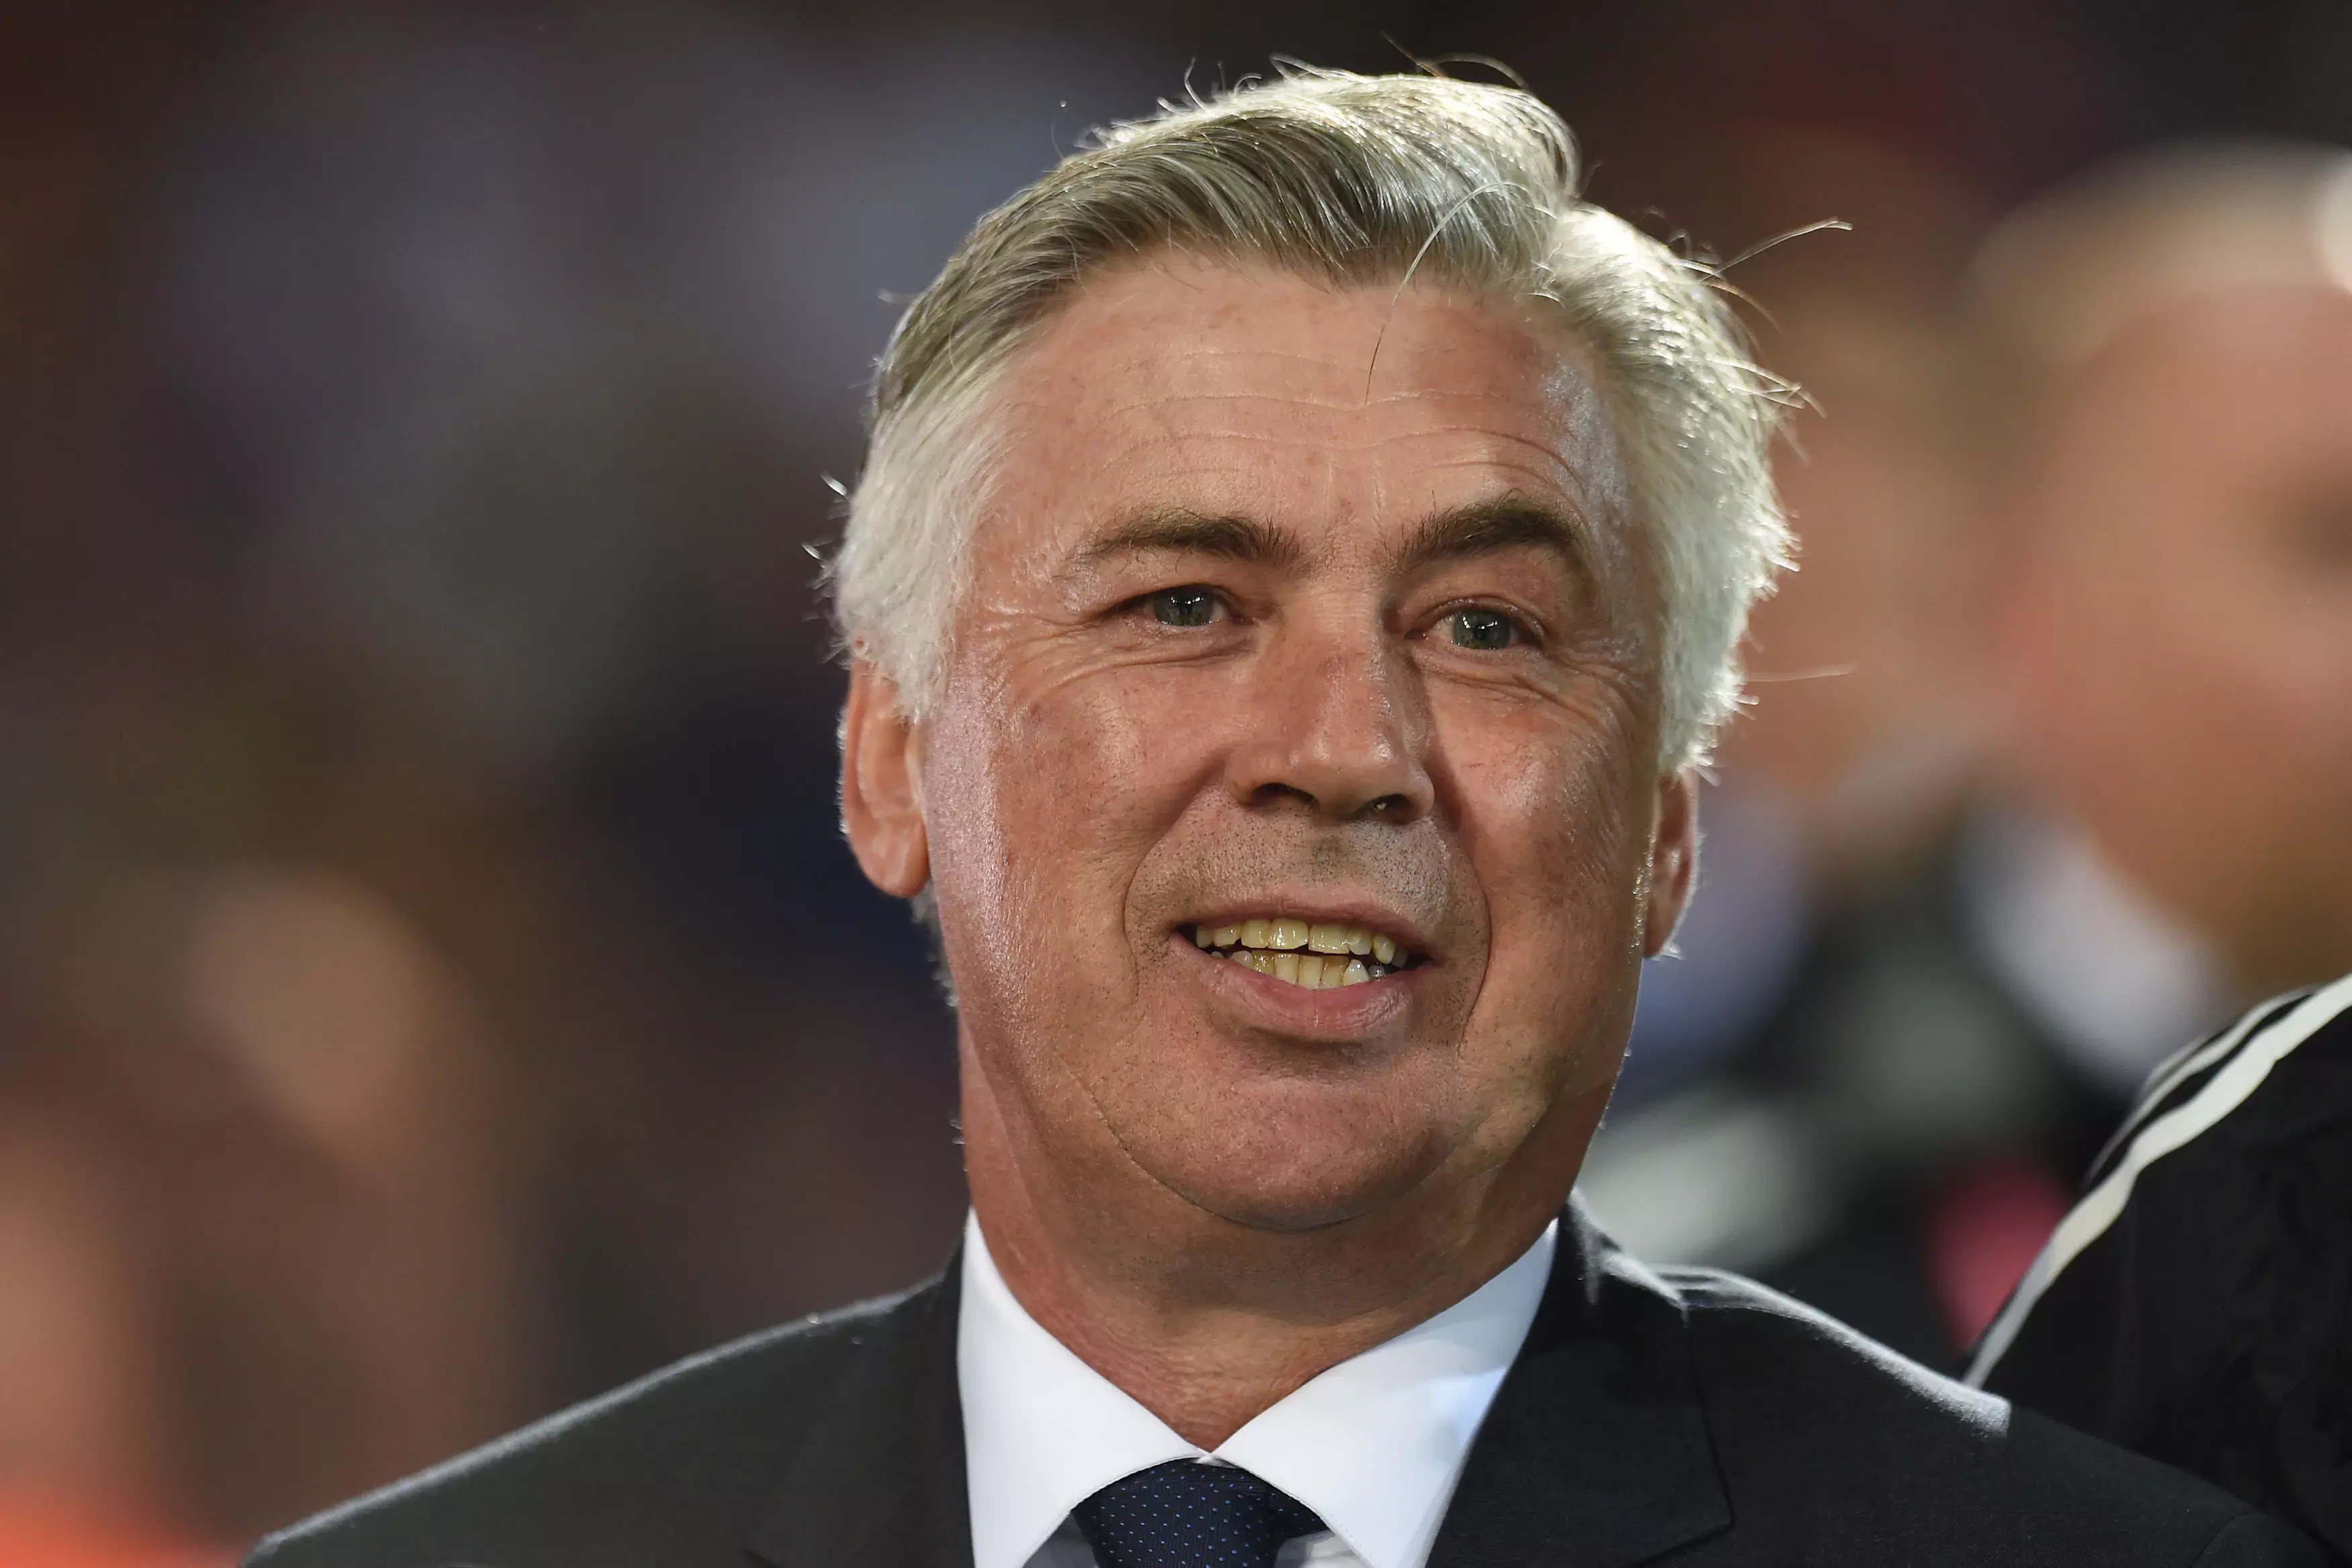 Ancelotti is a three time Champions League winner as a manager. Image: PA Images.